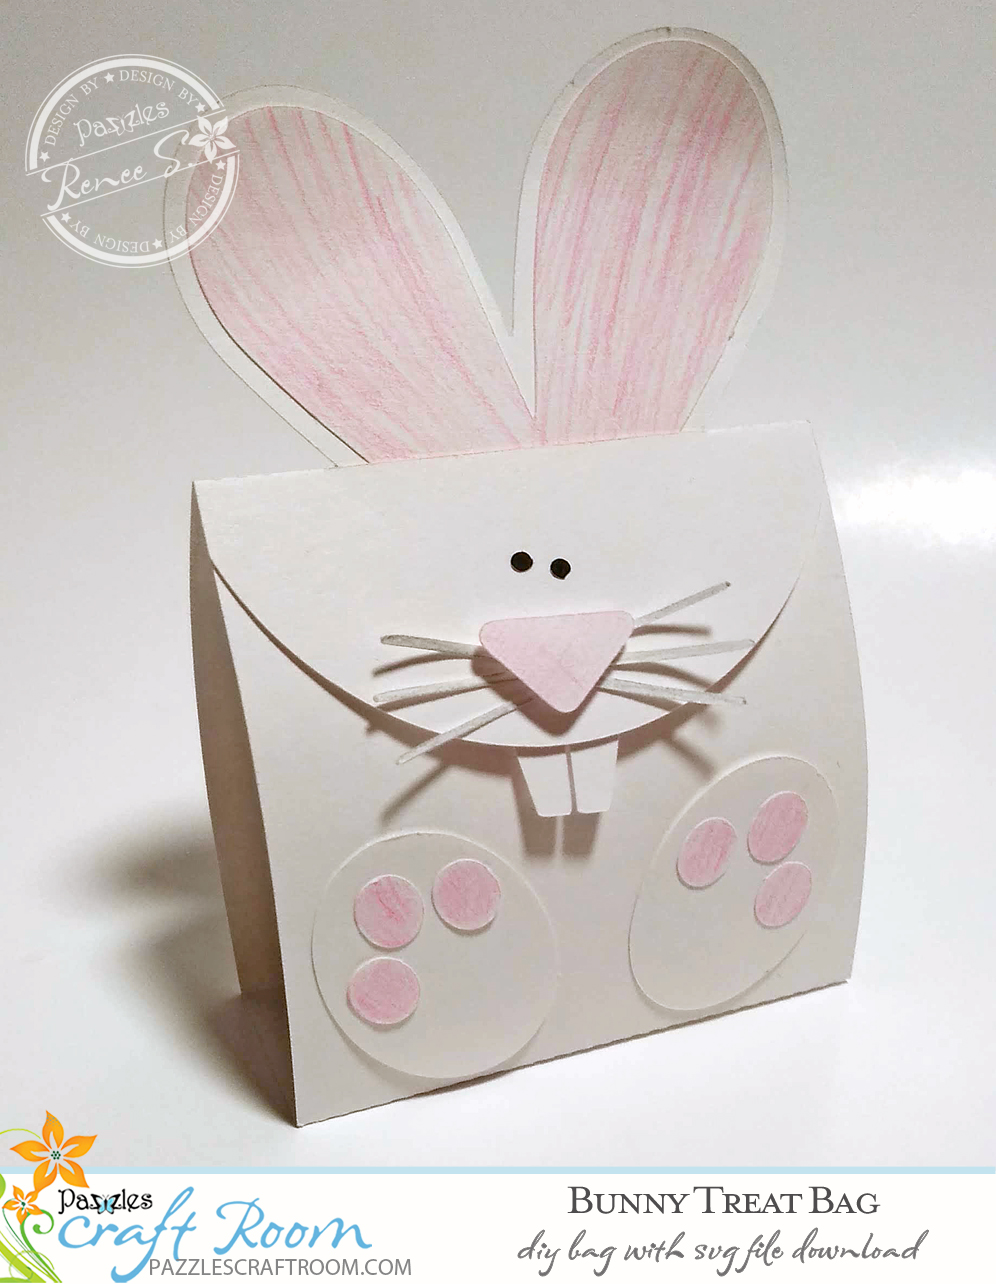 Pazzles DIY Bunny Treat Bag with instant SVG download. Compatible with all major electronic cutters including Pazzles Inspiration, Cricut, and Silhouette Cameo. Design by Renee Smart.